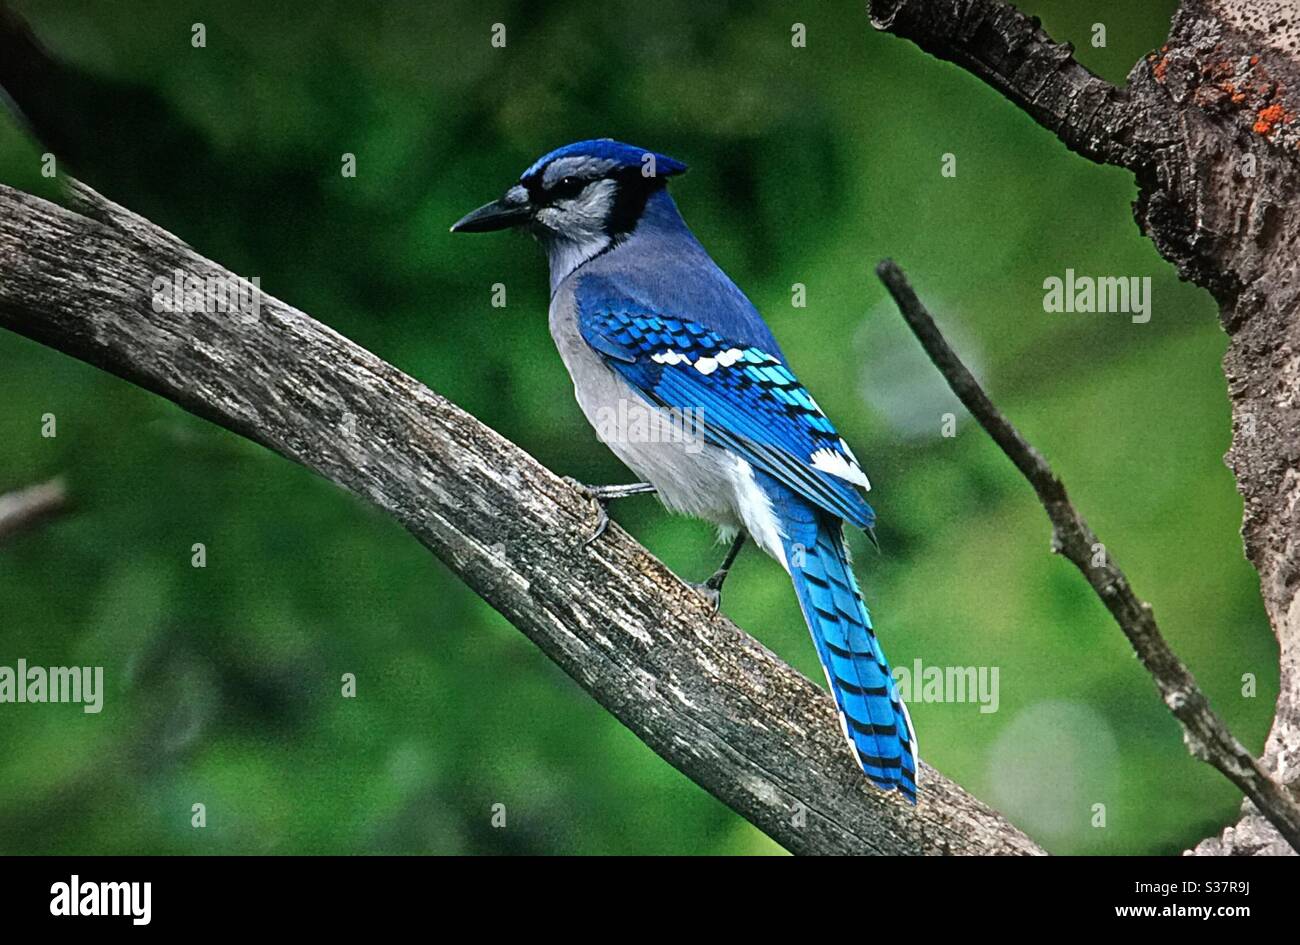 North American Birds, Birds of North America , Bluejay, bird, nature, woods, forest, feathers, flight, nature lover Stock Photo